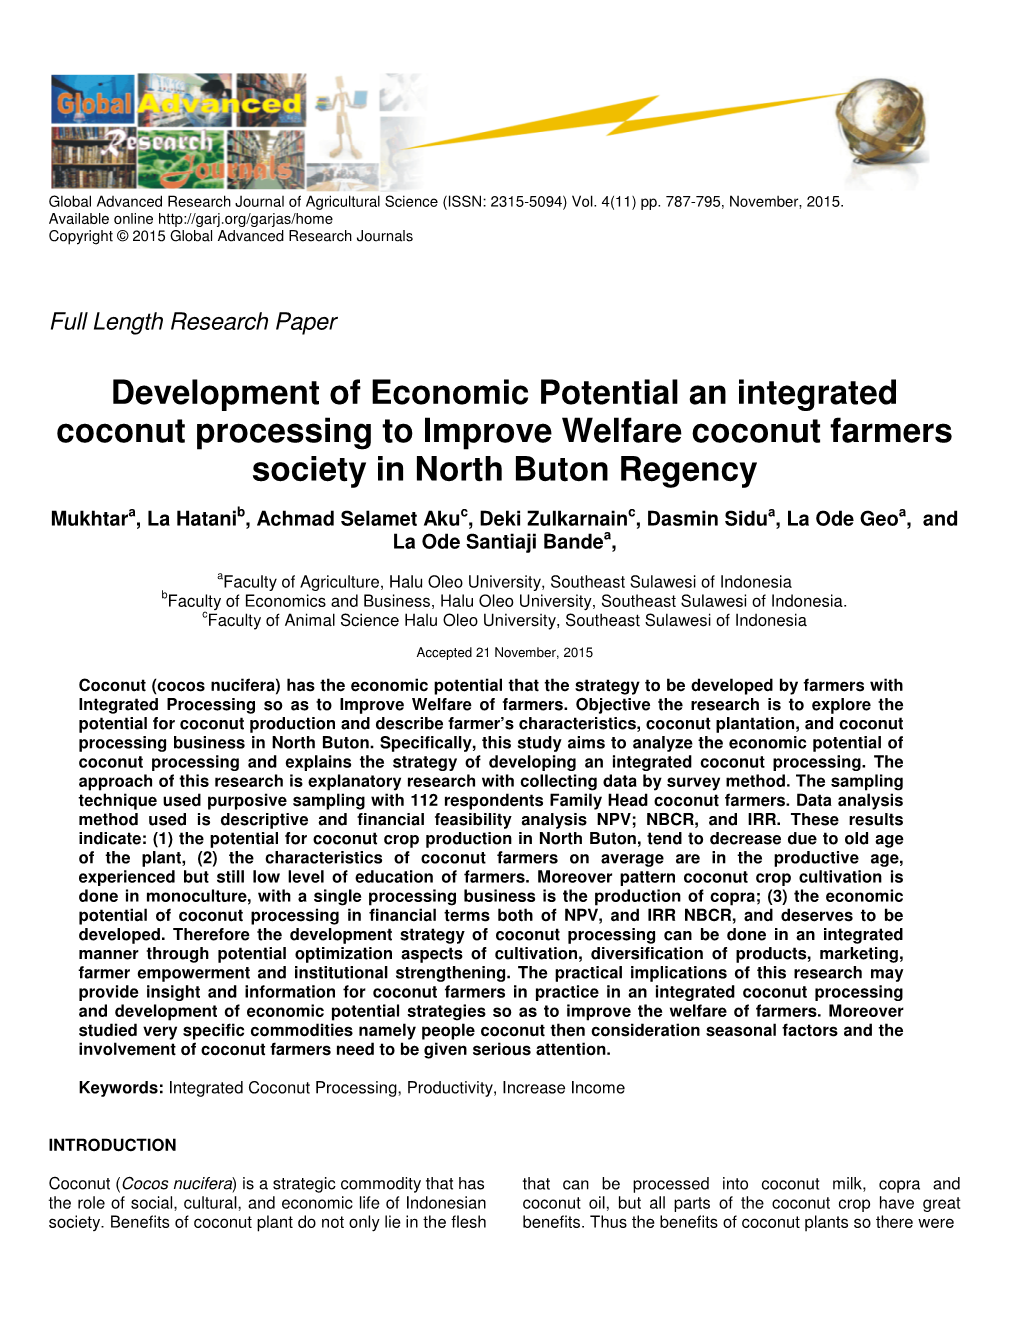 Development of Economic Potential an Integrated Coconut Processing to Improve Welfare Coconut Farmers Society in North Buton Regency